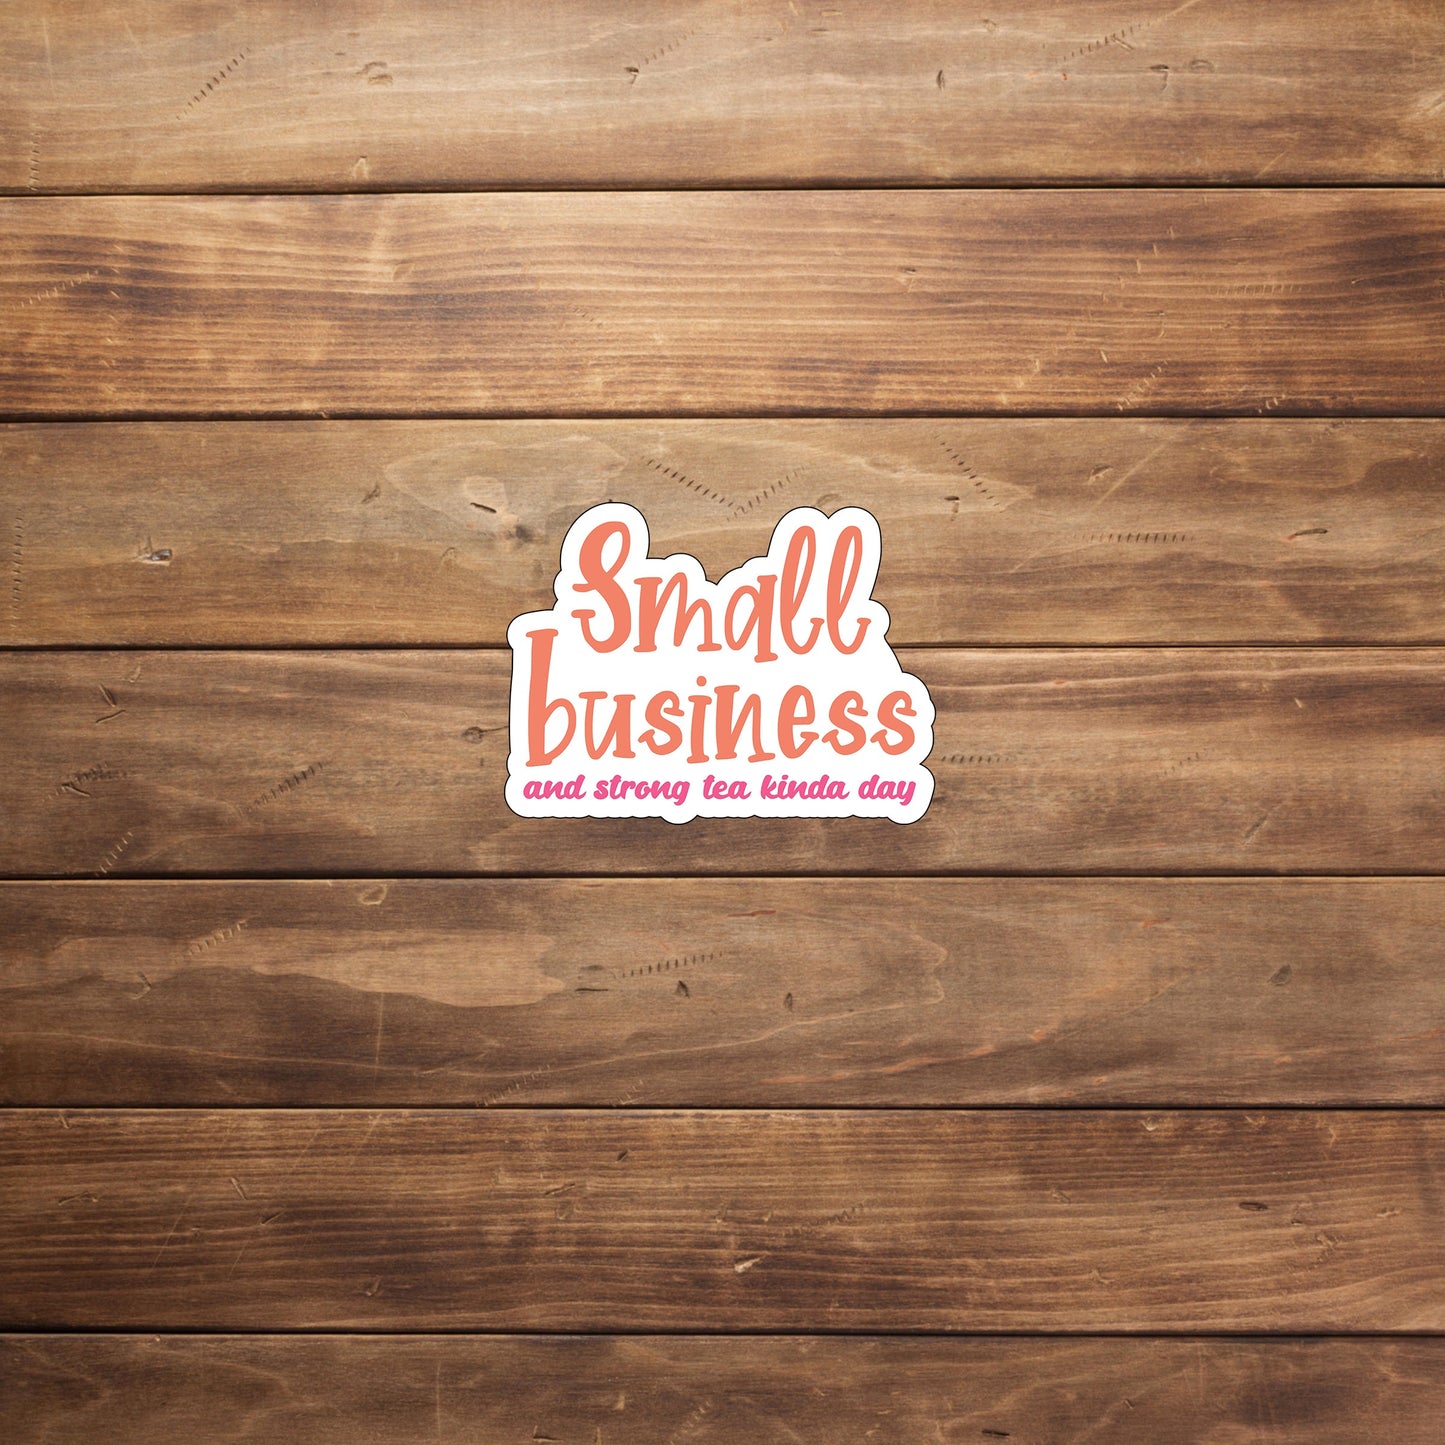 Small business and strong tea kind a day  Sticker,  Vinyl sticker, laptop sticker, Tablet sticker